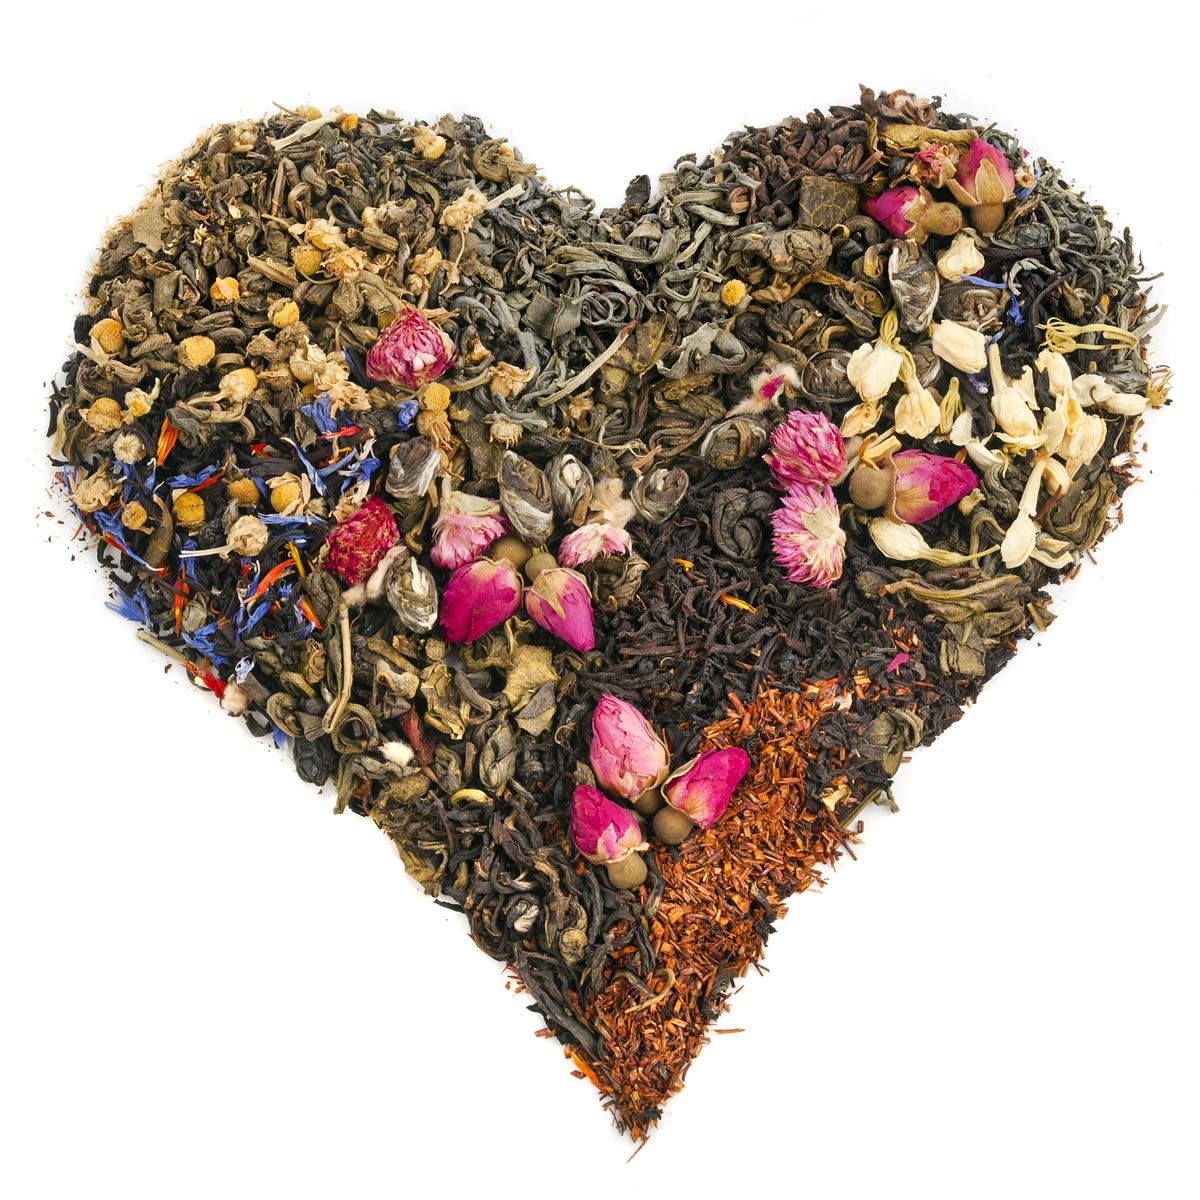 Herbs for Love